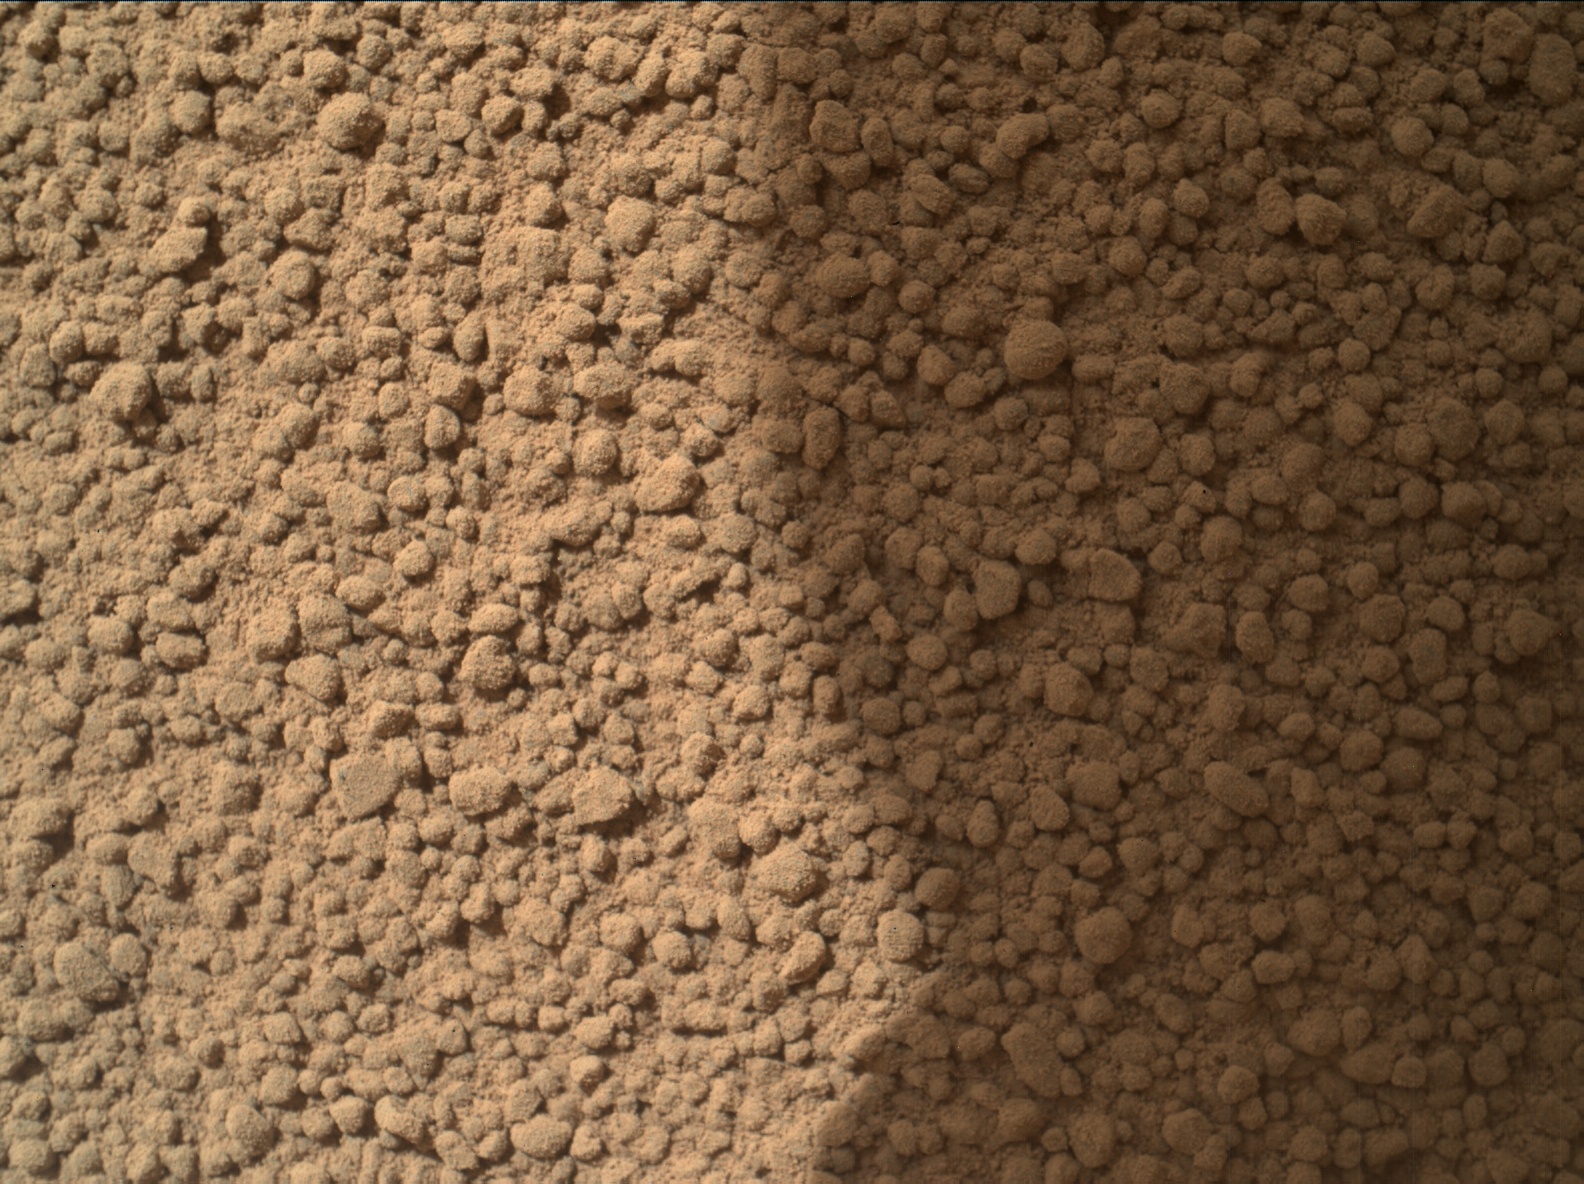 Nasa's Mars rover Curiosity acquired this image using its Mars Hand Lens Imager (MAHLI) on Sol 60